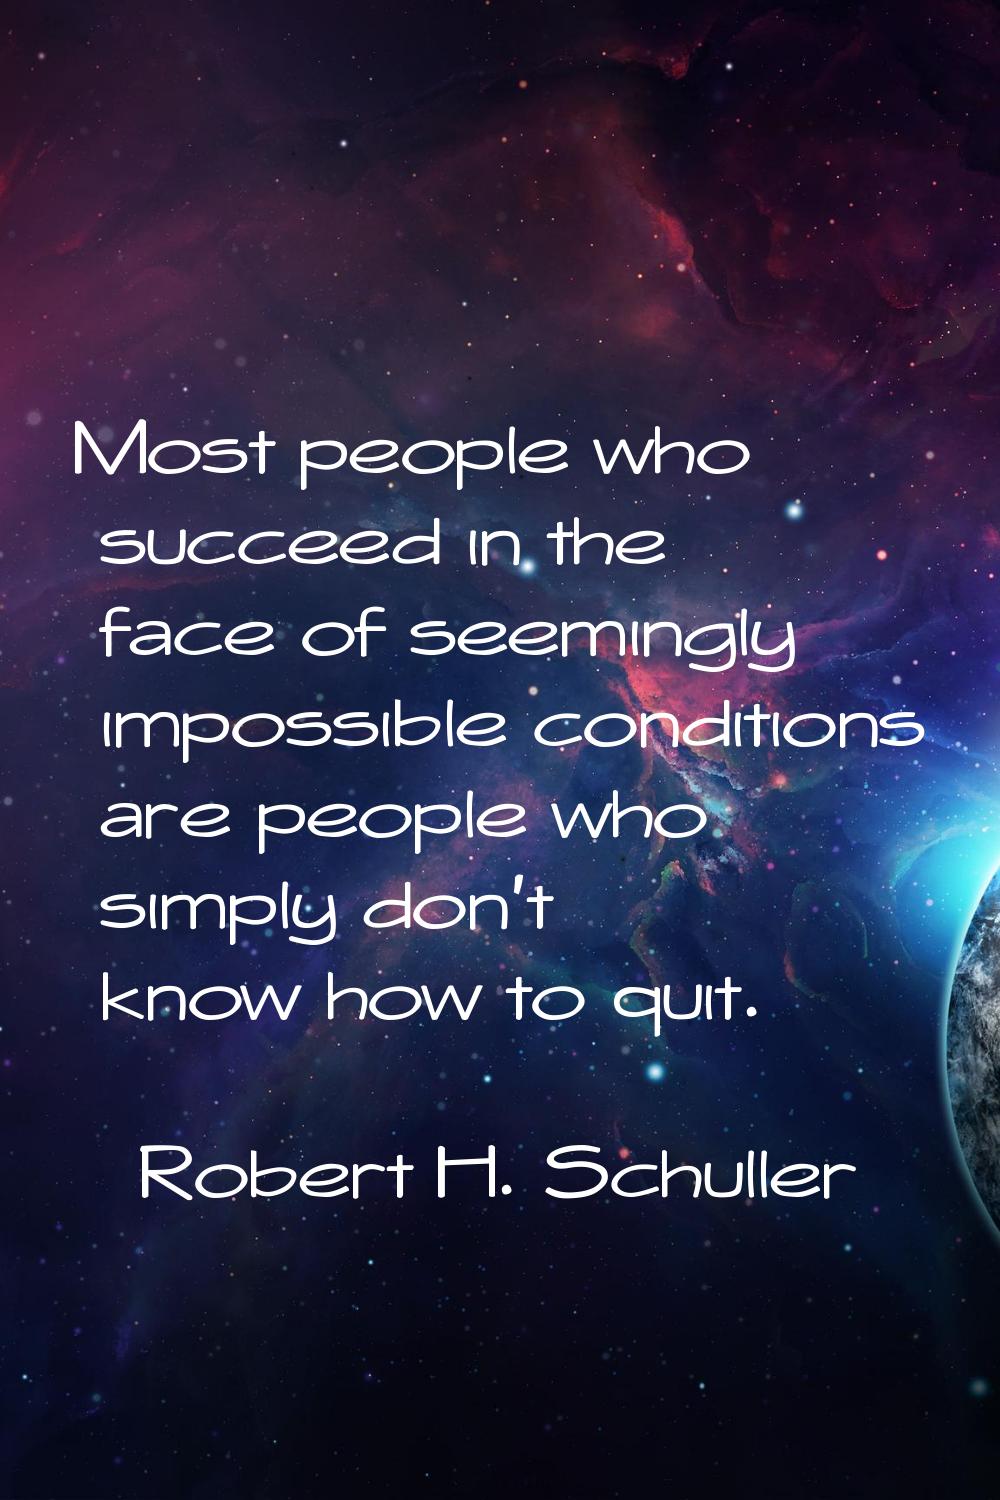 Most people who succeed in the face of seemingly impossible conditions are people who simply don't 